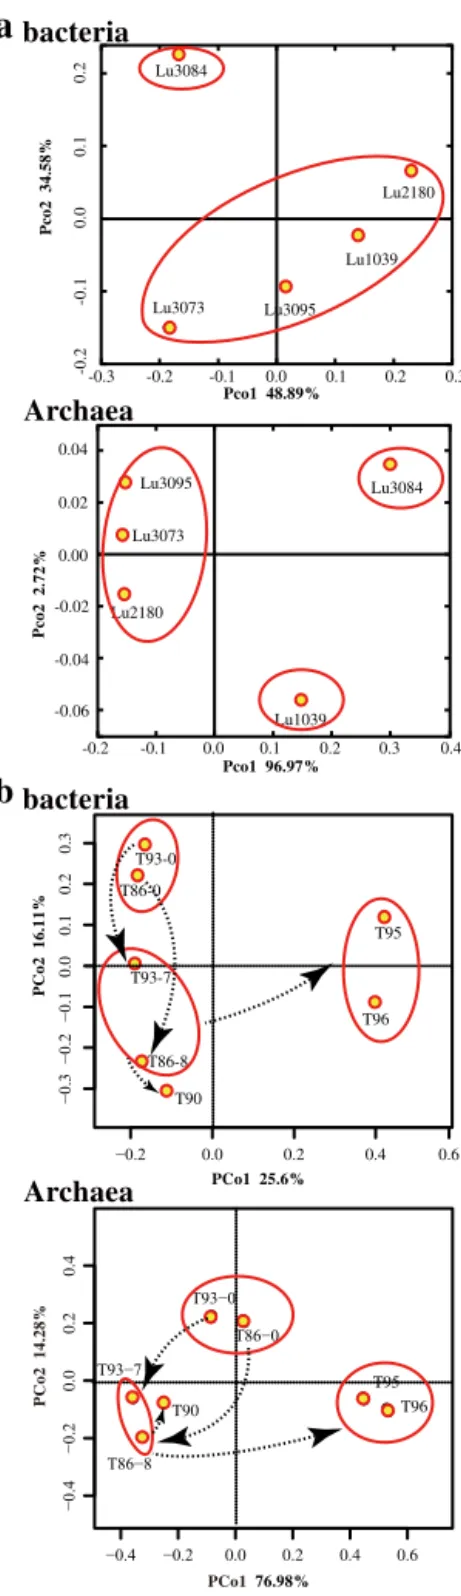 Figure 6. Principal coordinate analysis of microbial communities used to investigate the microbial distribution in injected water and reservoir strata